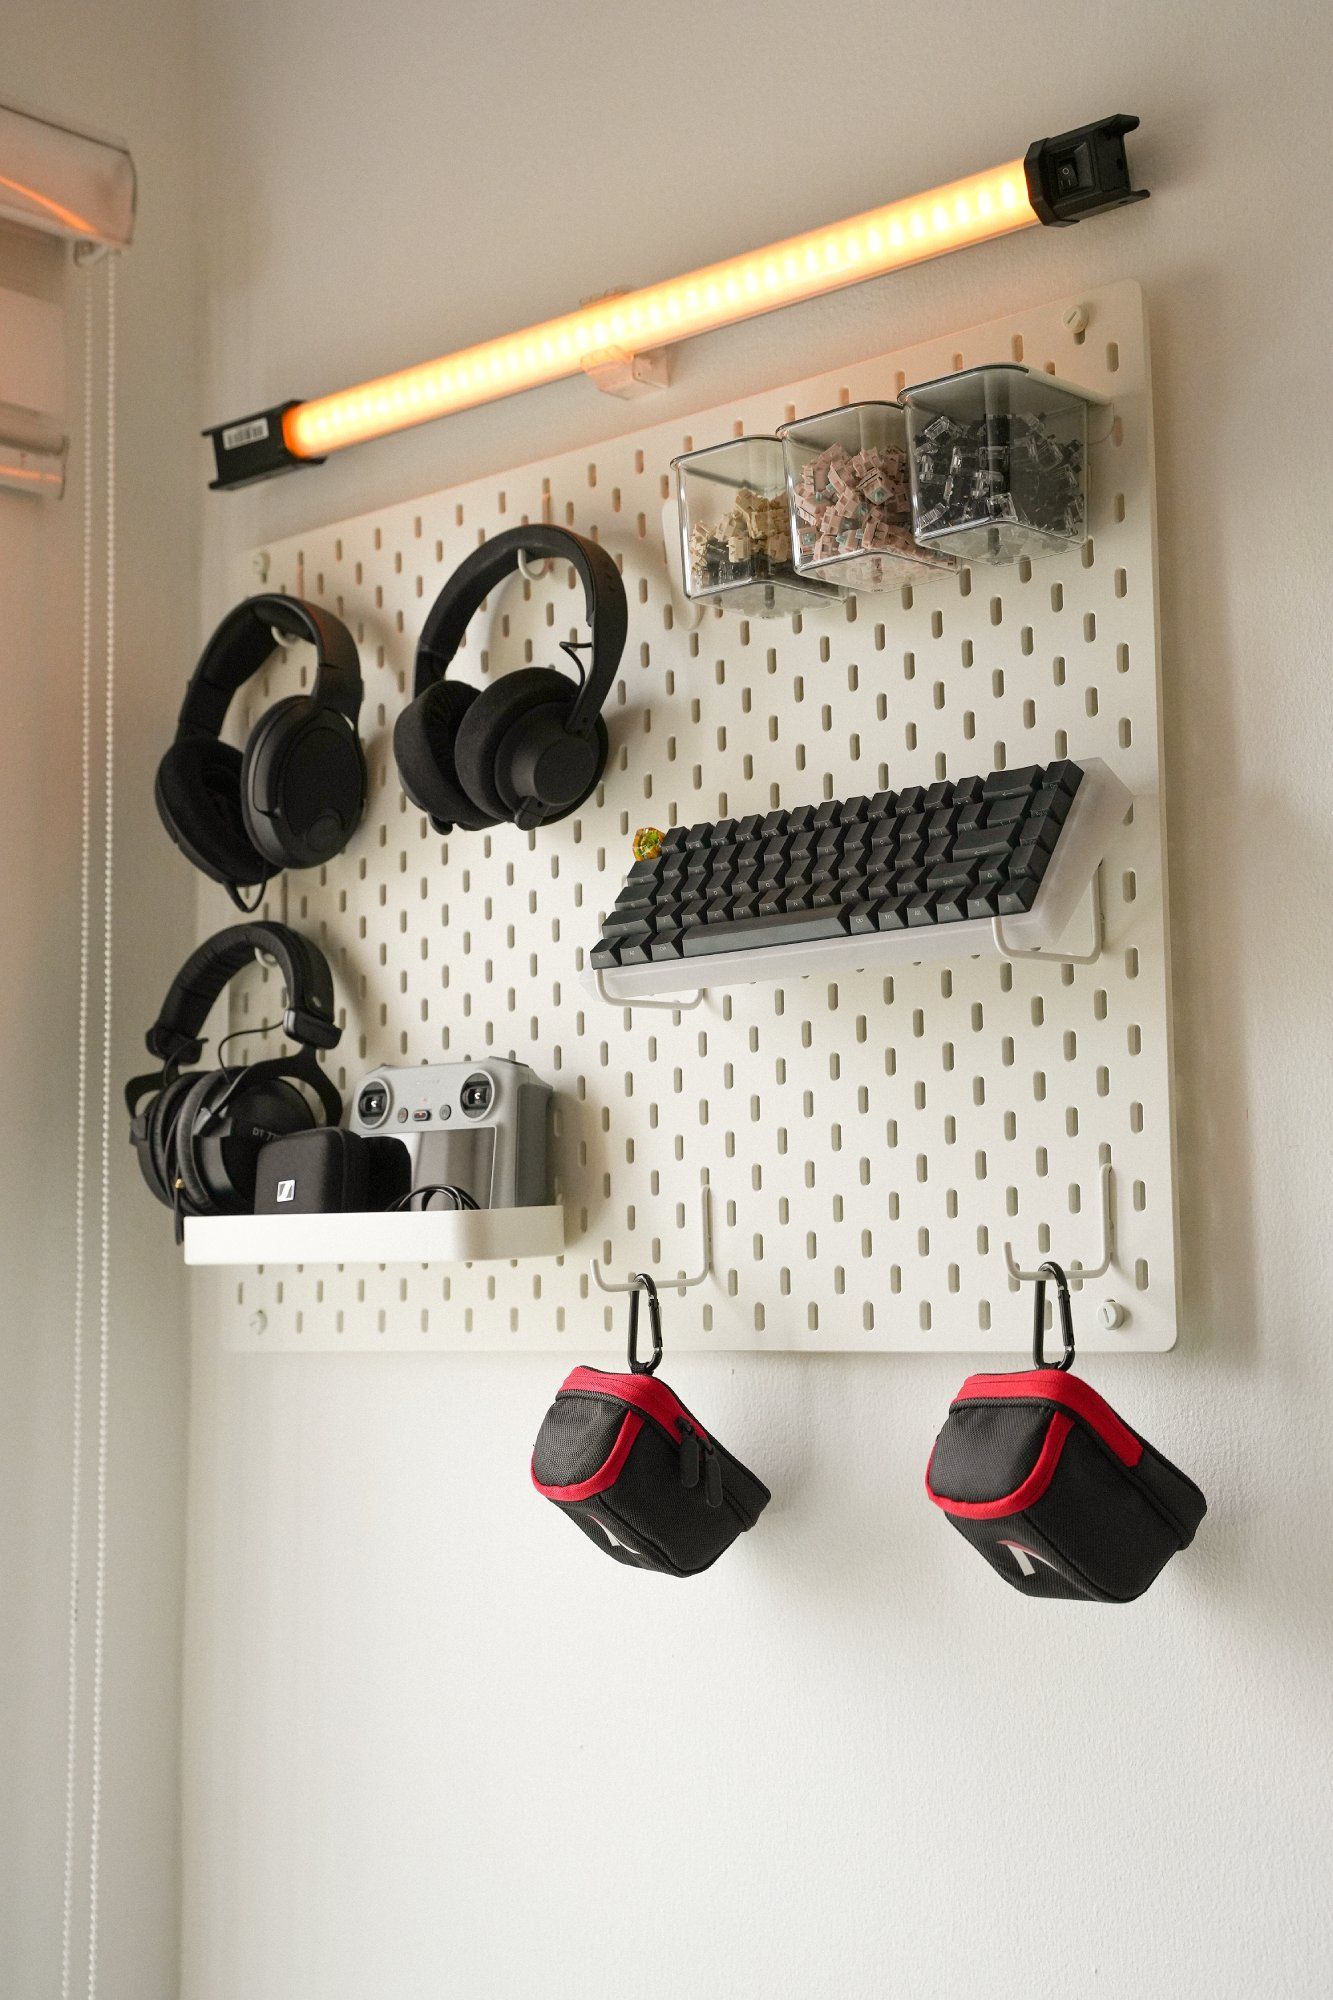 A pegboard holding extra peripherals in a home office